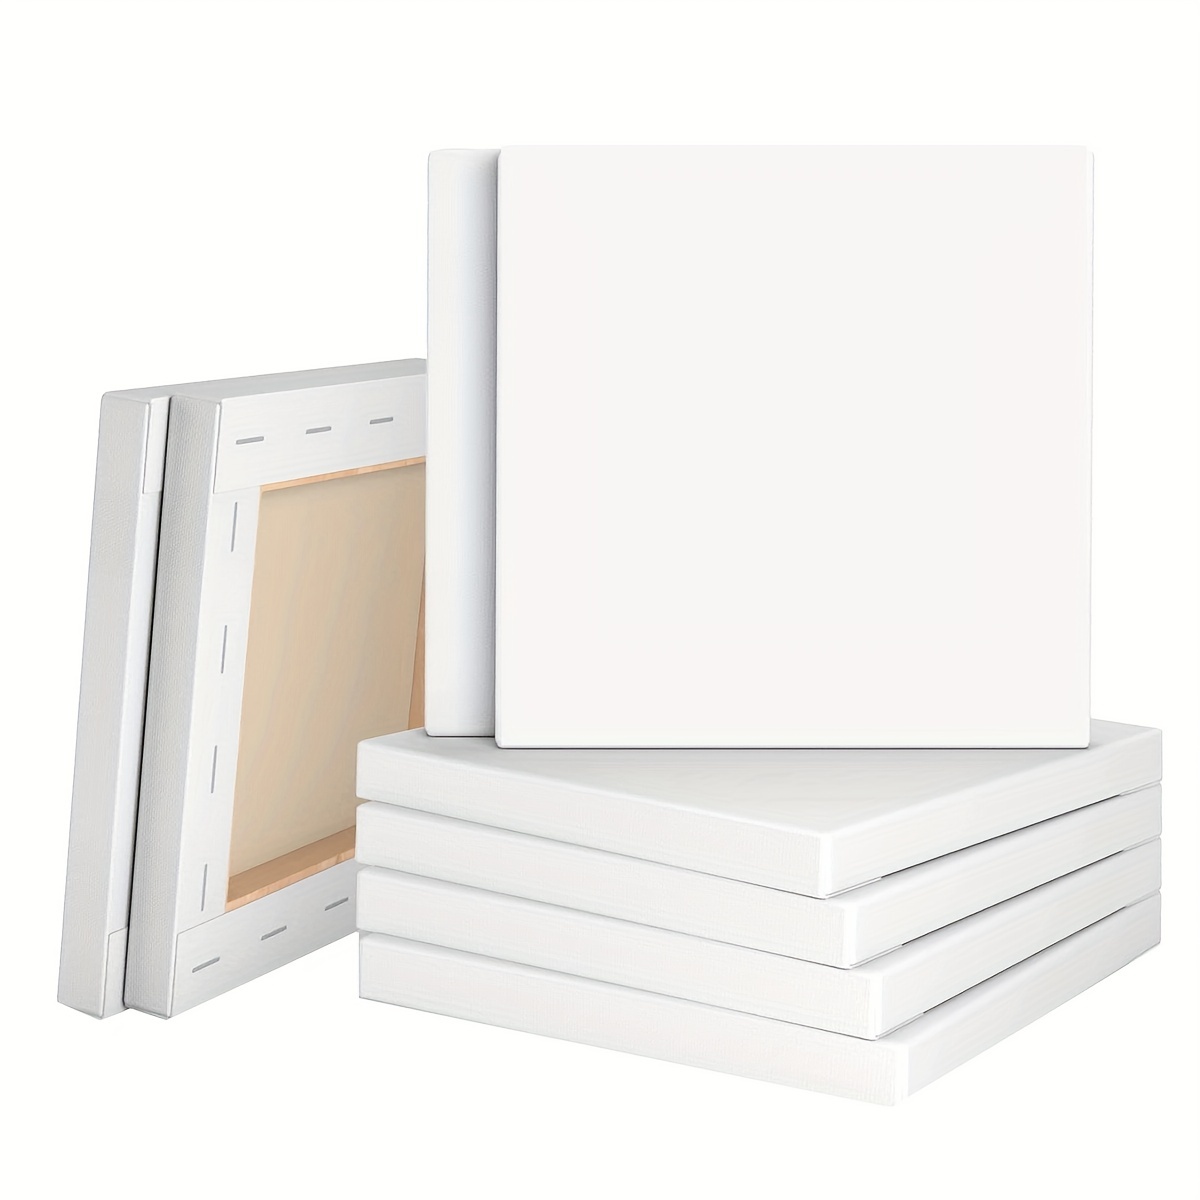  PHOENIX Small Painting Canvas Panels 4x4 Inch, 24 Bulk Pack - 8  Oz Triple Primed 100% Cotton Acid Free Square Canvas Boards for Painting,  White Blank Flat Canvas Boards for Acrylic, Oil Paints